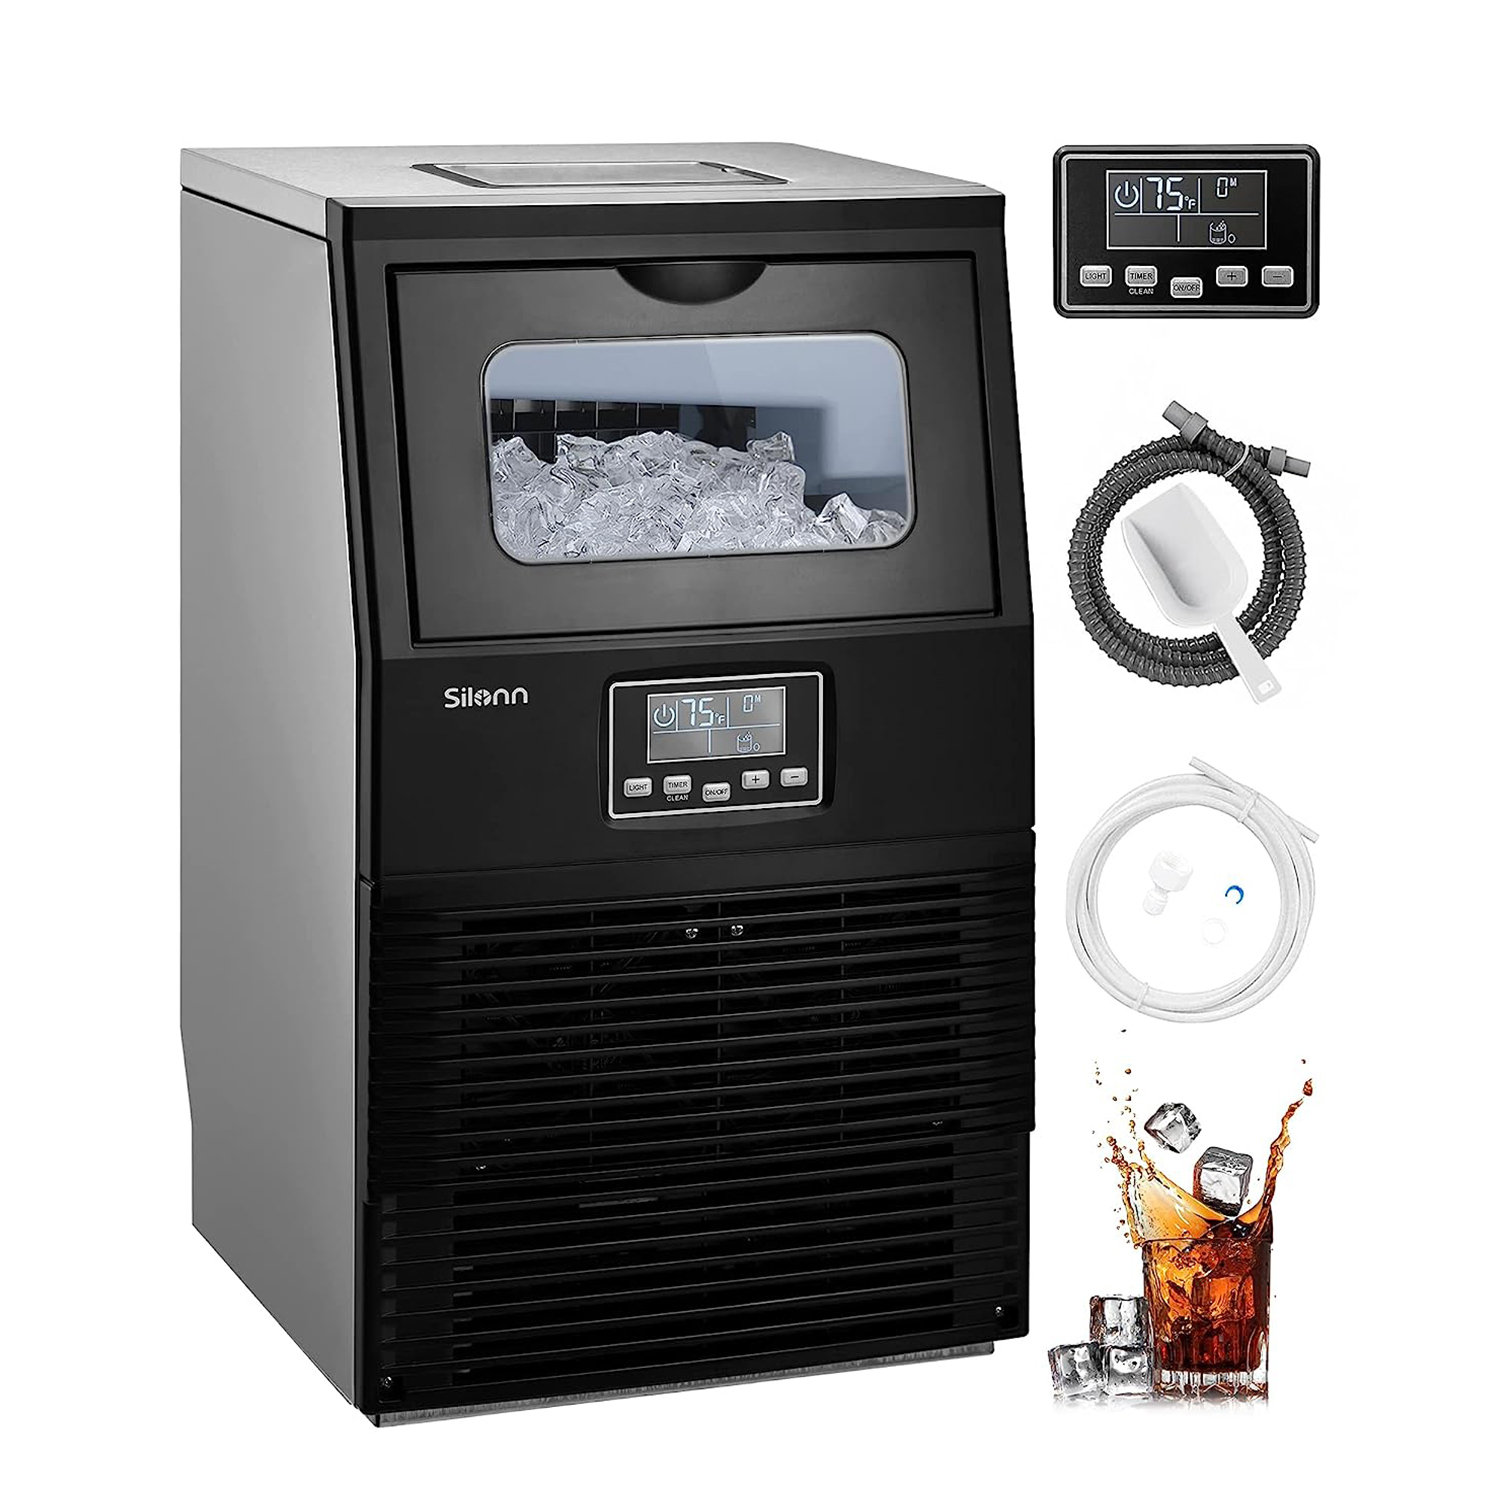 Oylus 70 Lb. Daily Production Cube Clear Ice Freestanding Ice